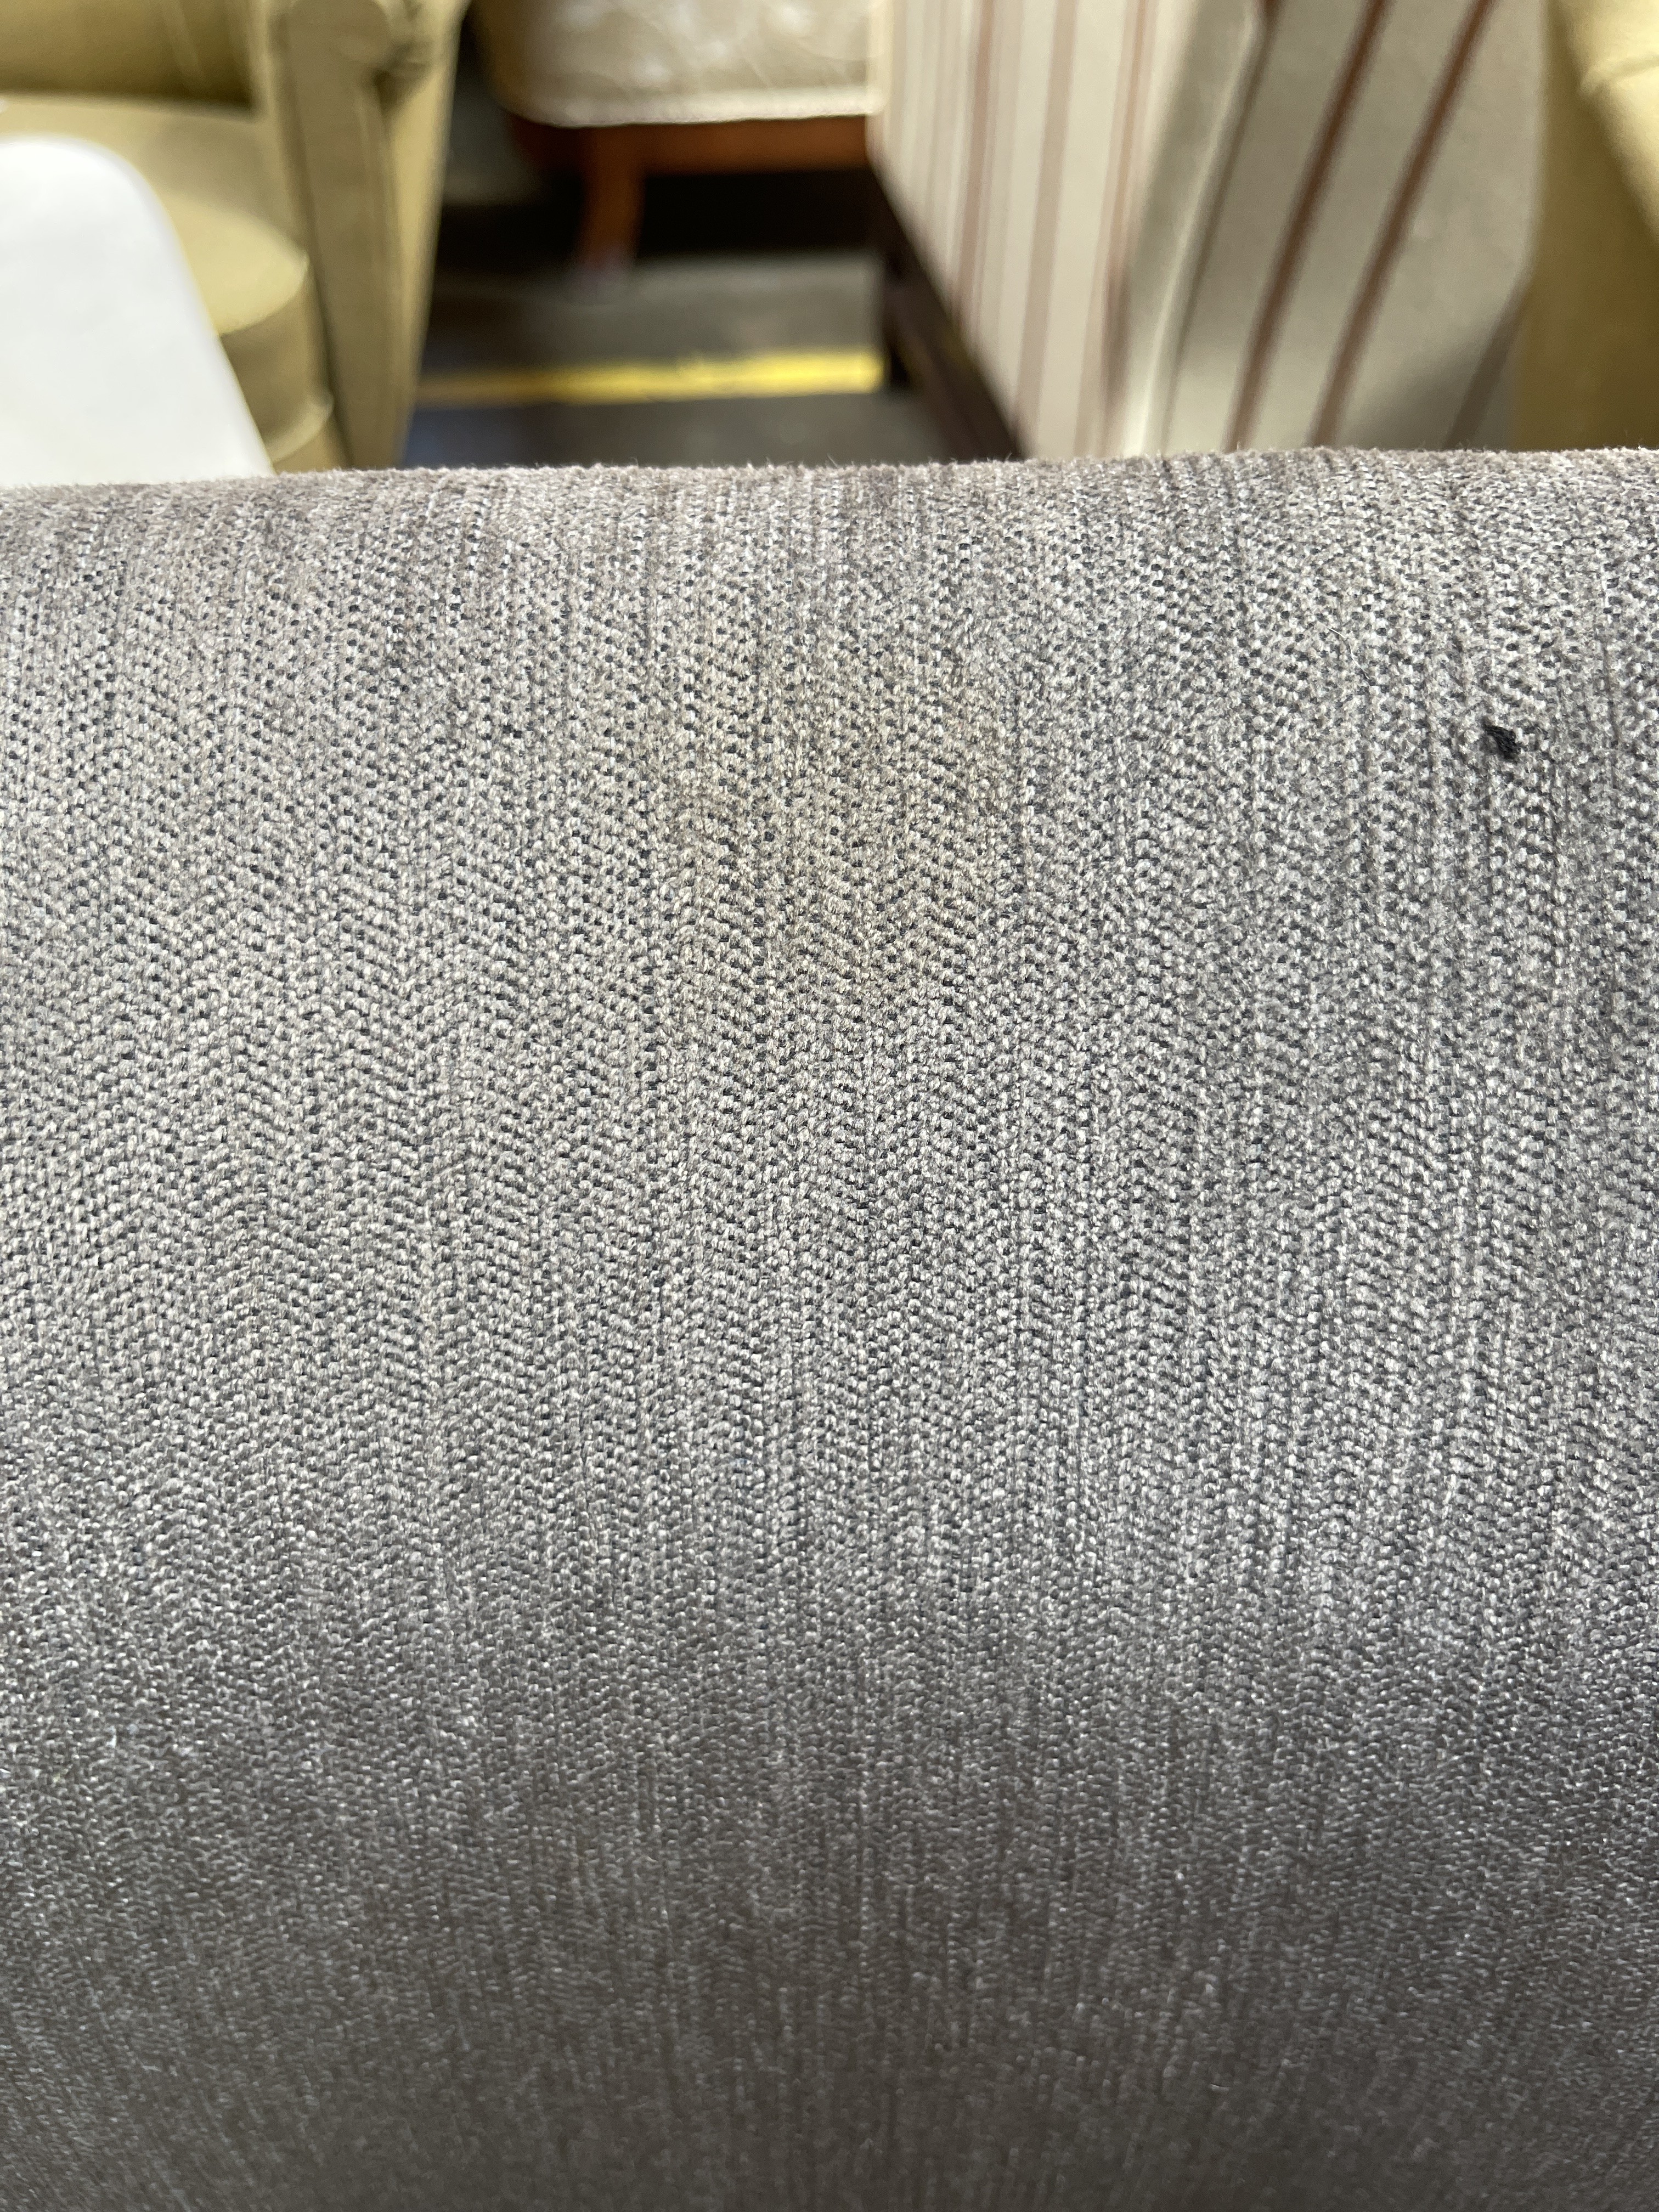 a close up of a chair with a gray fabric